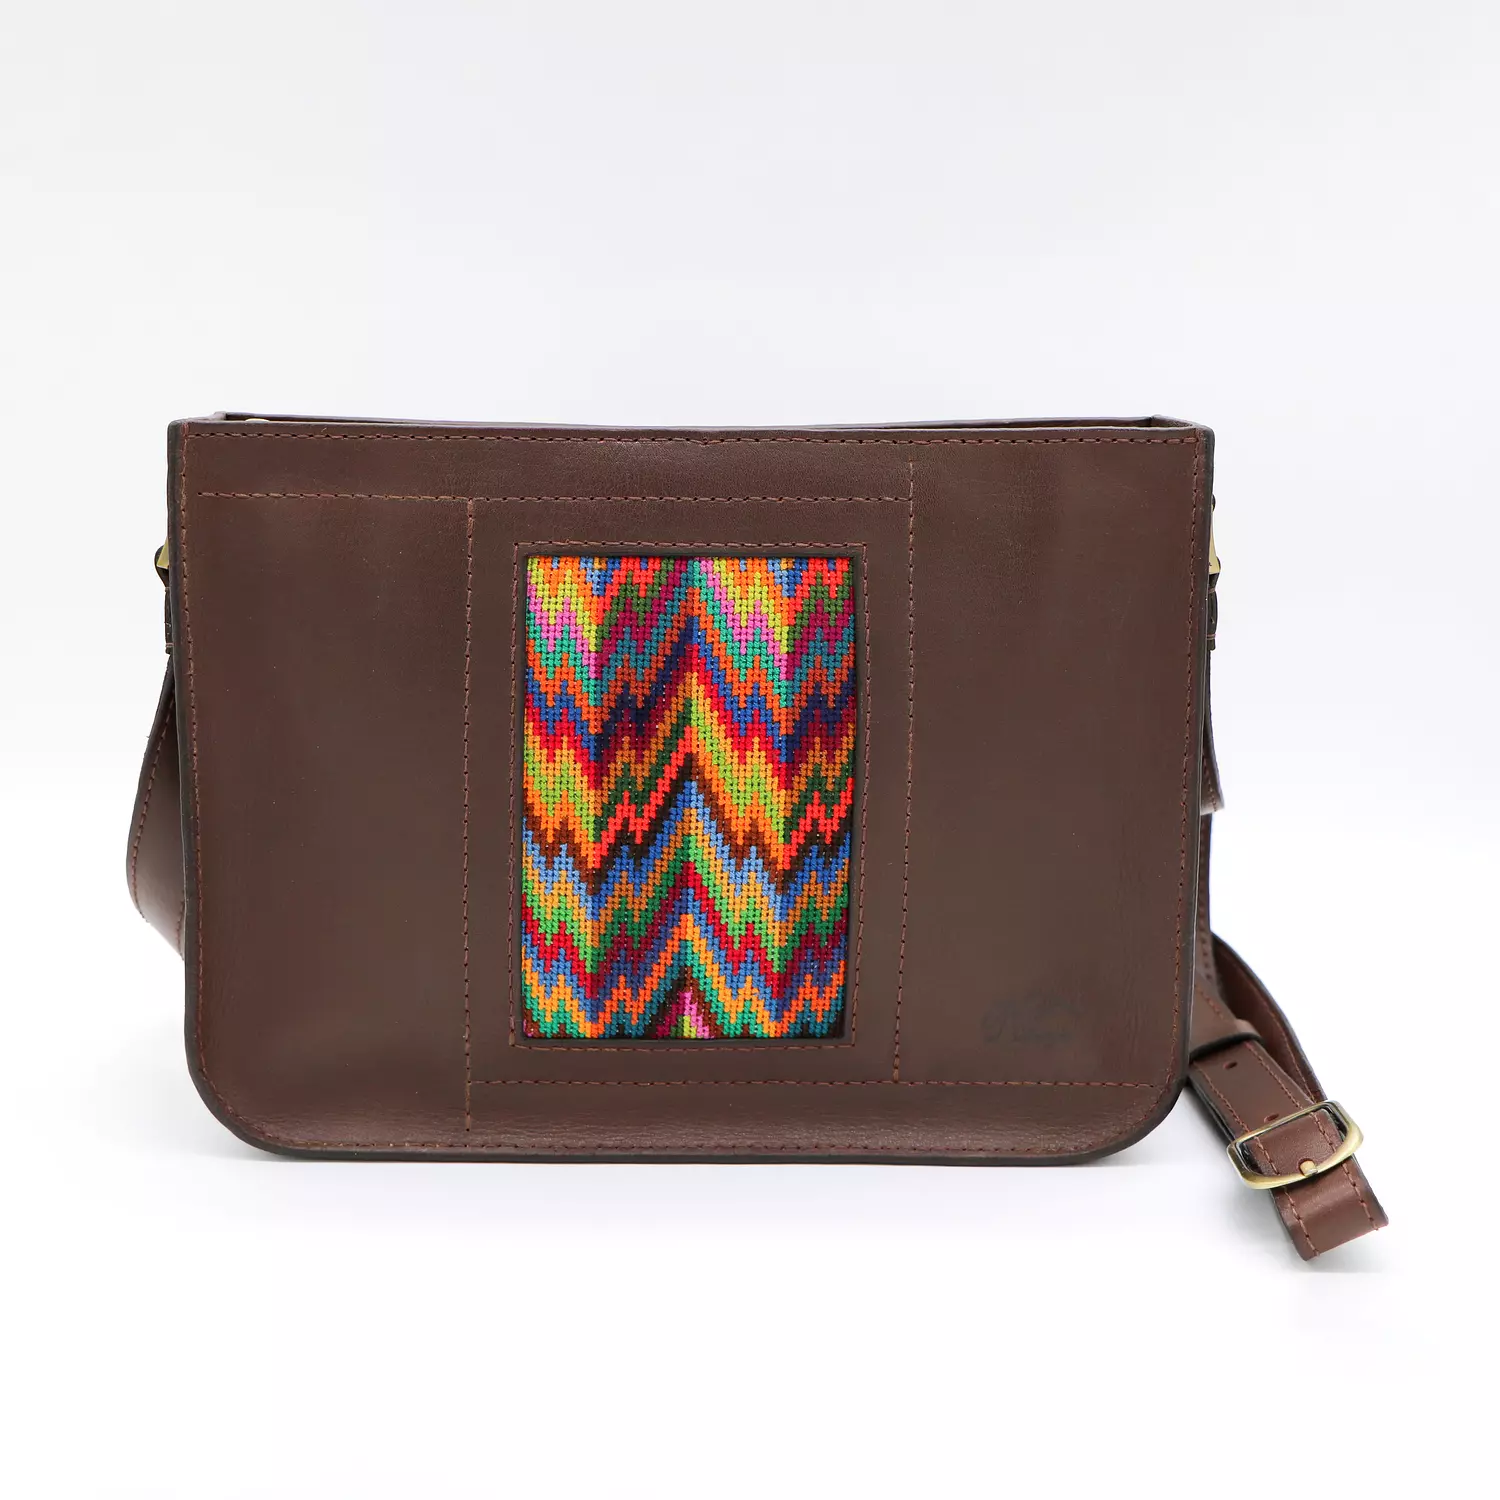 Genuine leather bag with colorful Cross stitching. hover image